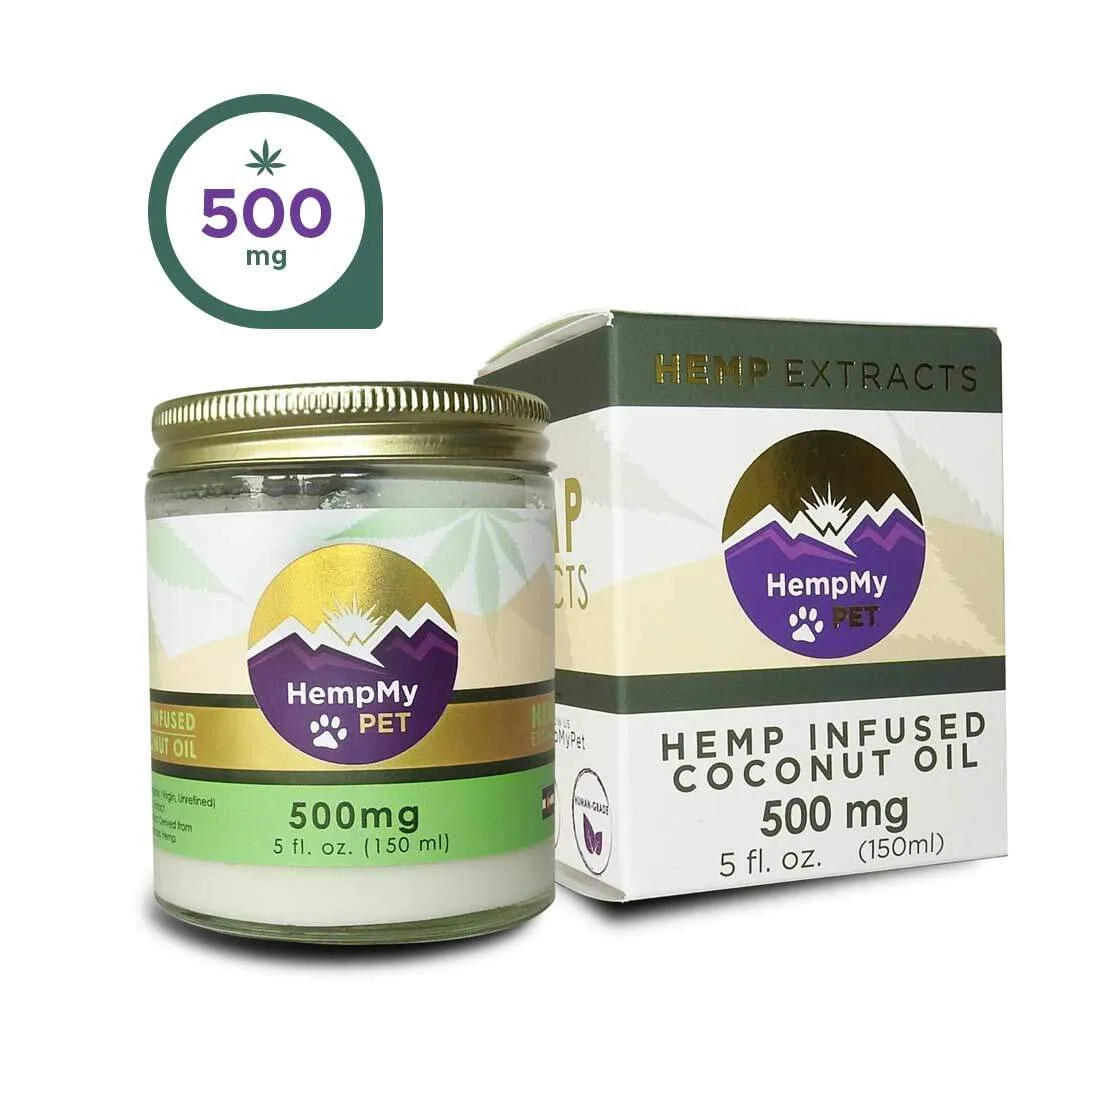 Organic Coconut Oil for Pets Infused with 500 mg of CBD from Full Spectrum Hemp